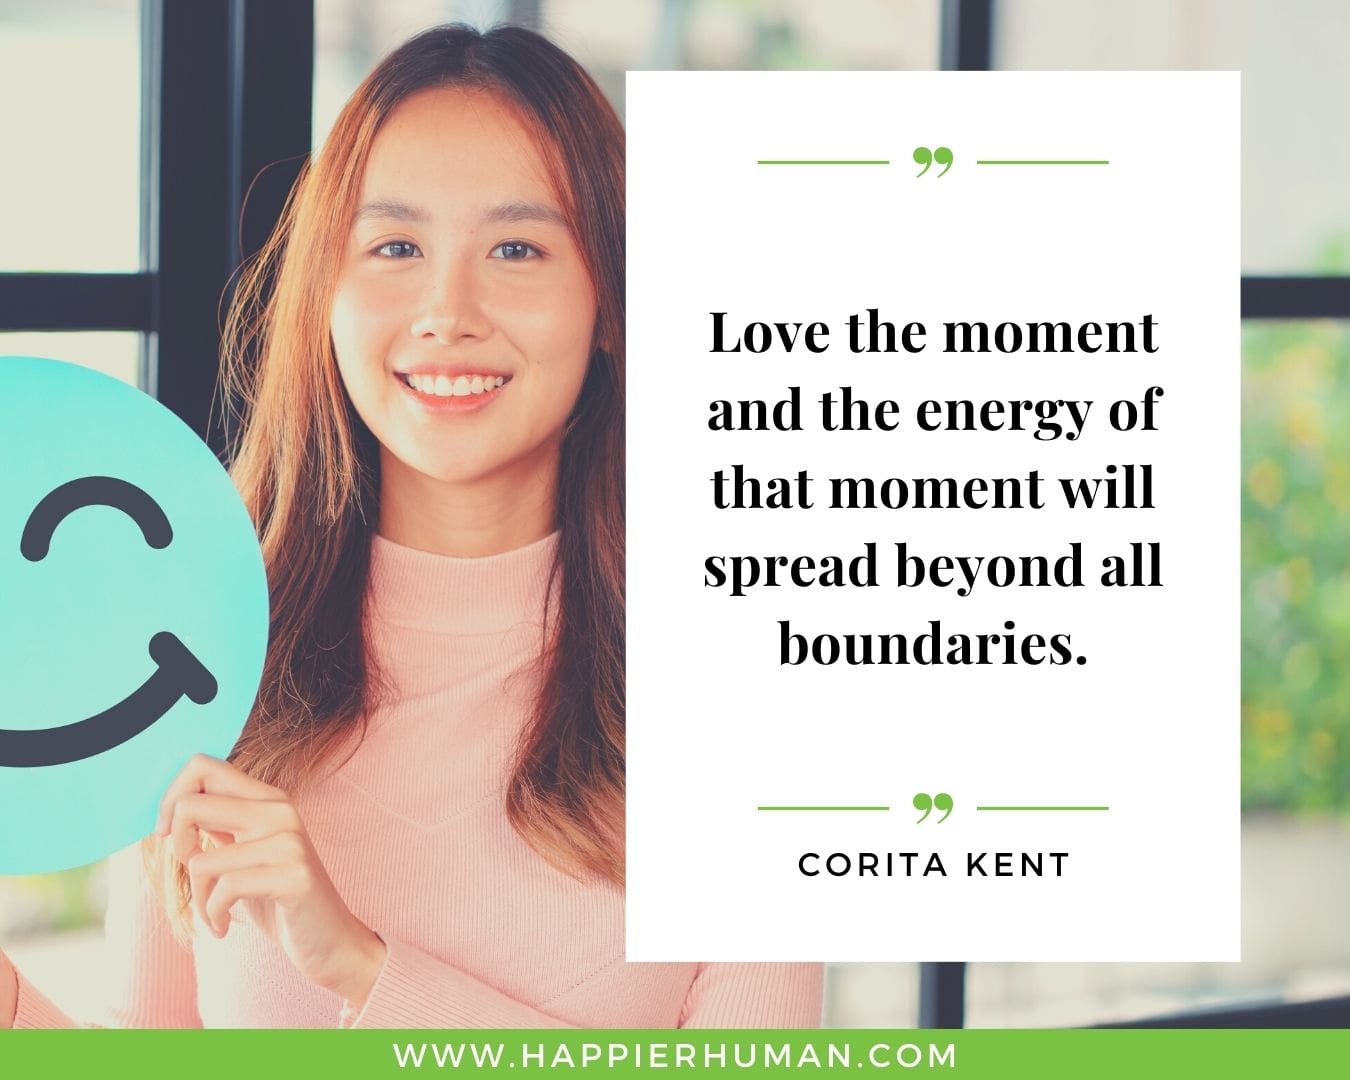 Positive Energy Quotes - “Love the moment and the energy of that moment will spread beyond all boundaries.” - Corita Kent